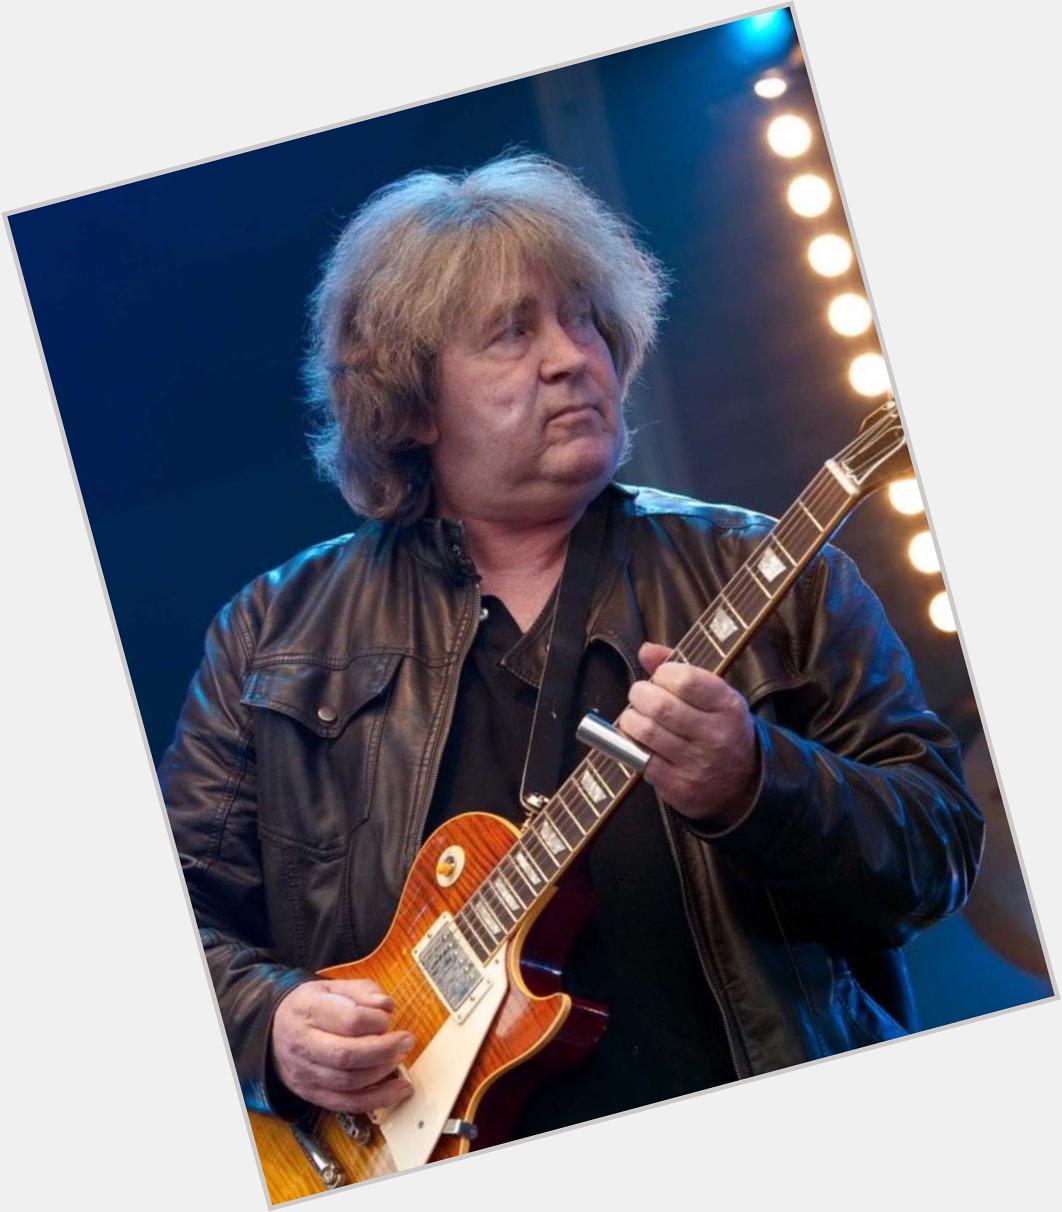 Brian\s replacement in the Stones is 66 today. Happy birthday Mick Taylor 